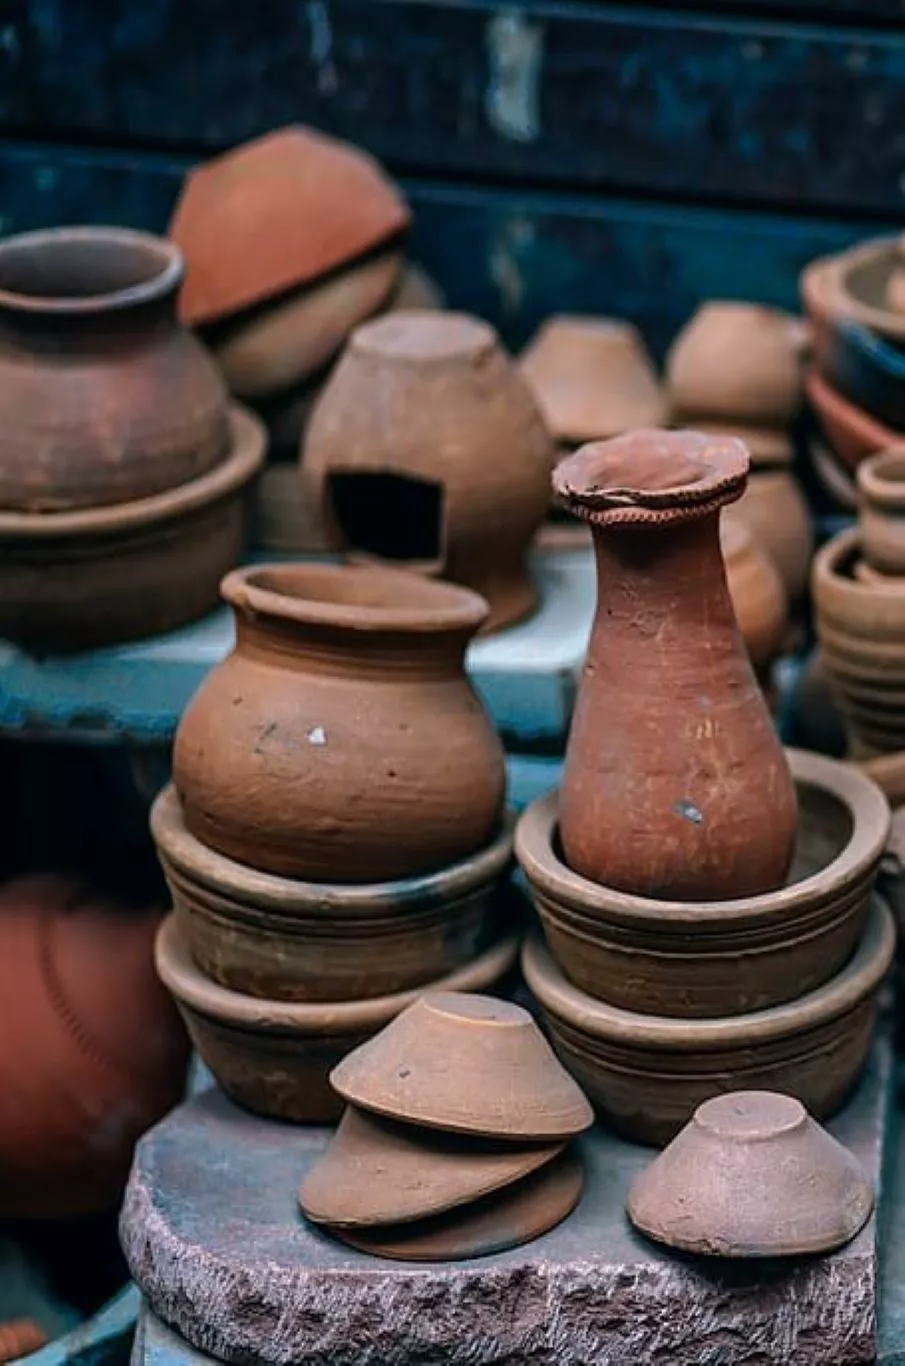 A collection of rustic clay pots